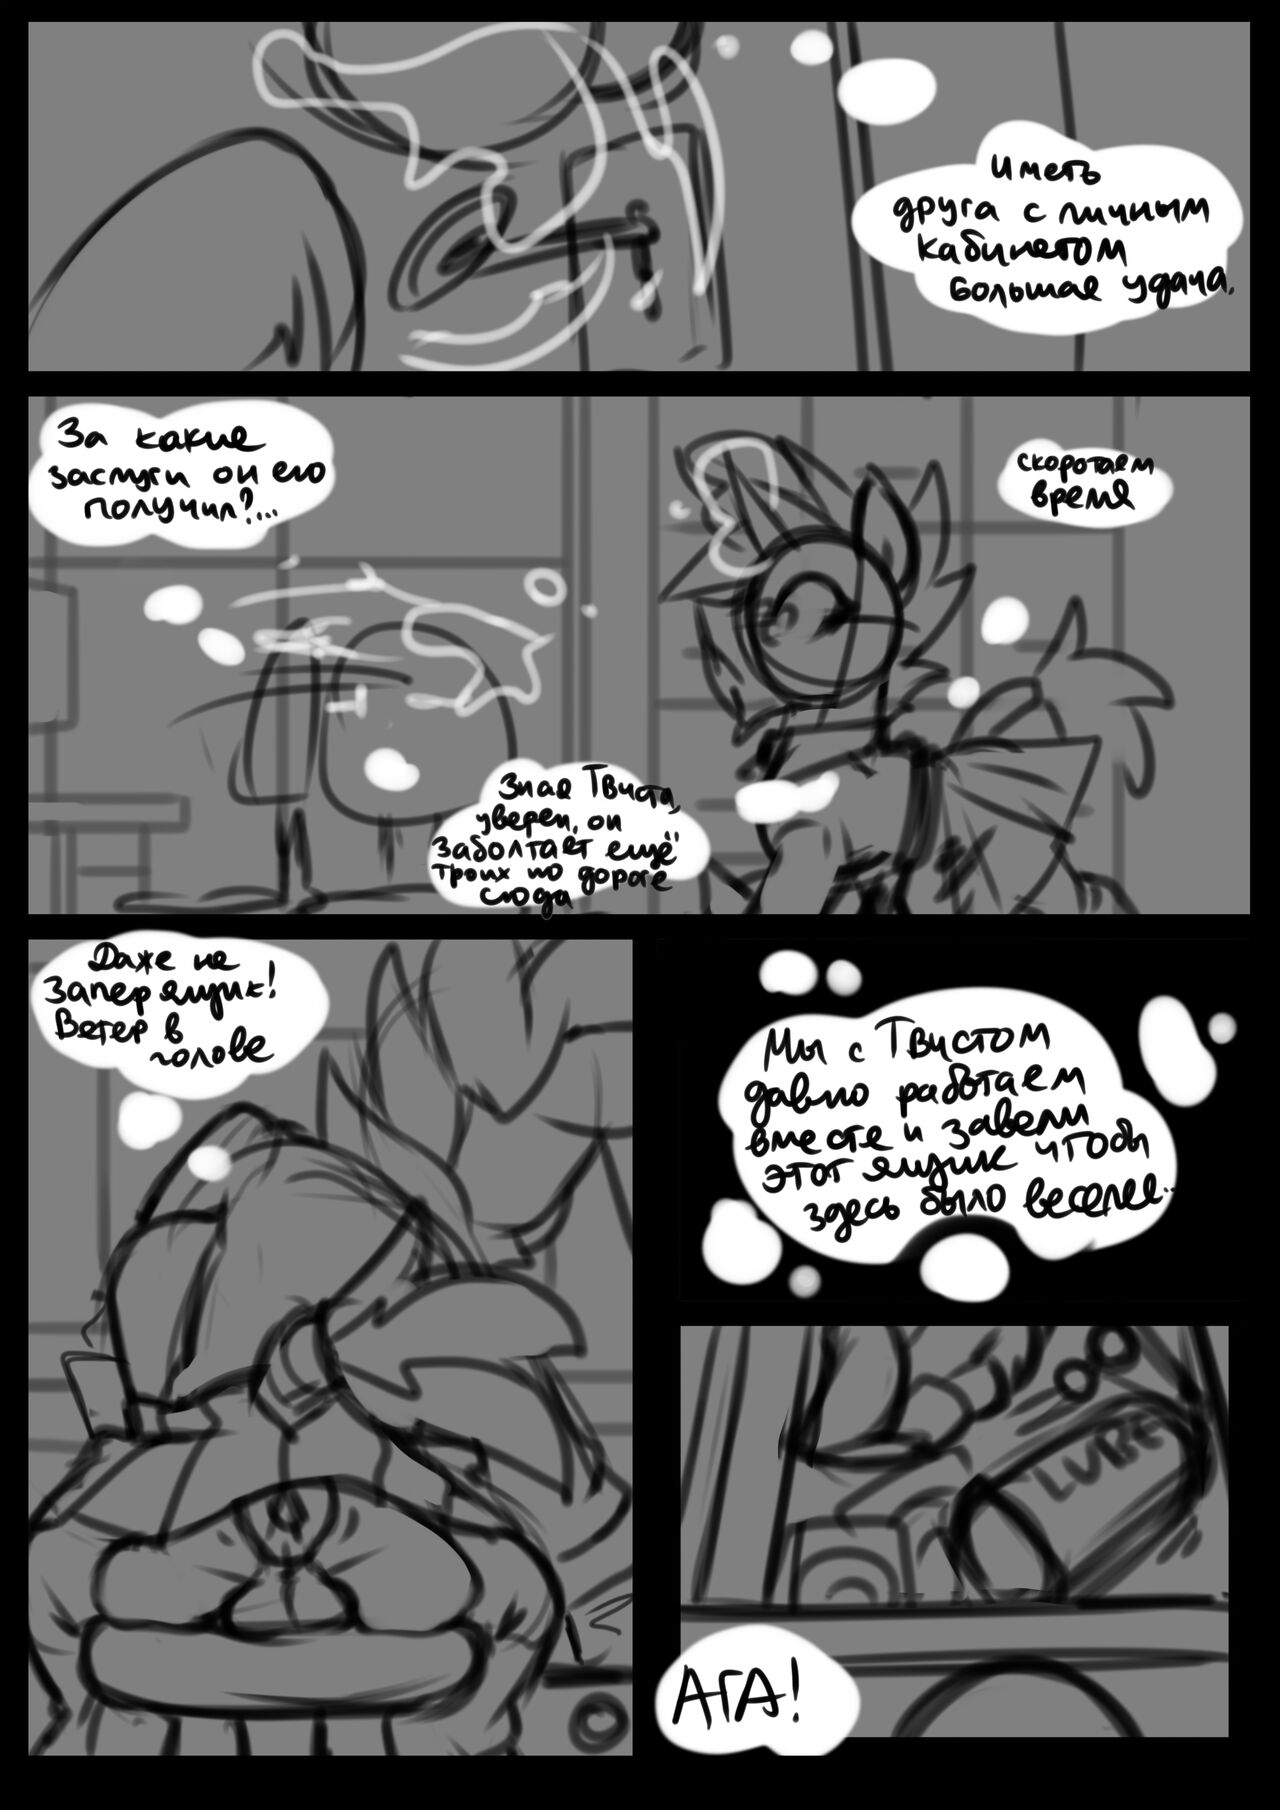 [JedaySkayVoker] Play the Record, ch. 1-3 (My Little Pony: Friendship is Magic) [+Sketches][Ongoing][Russian] 40